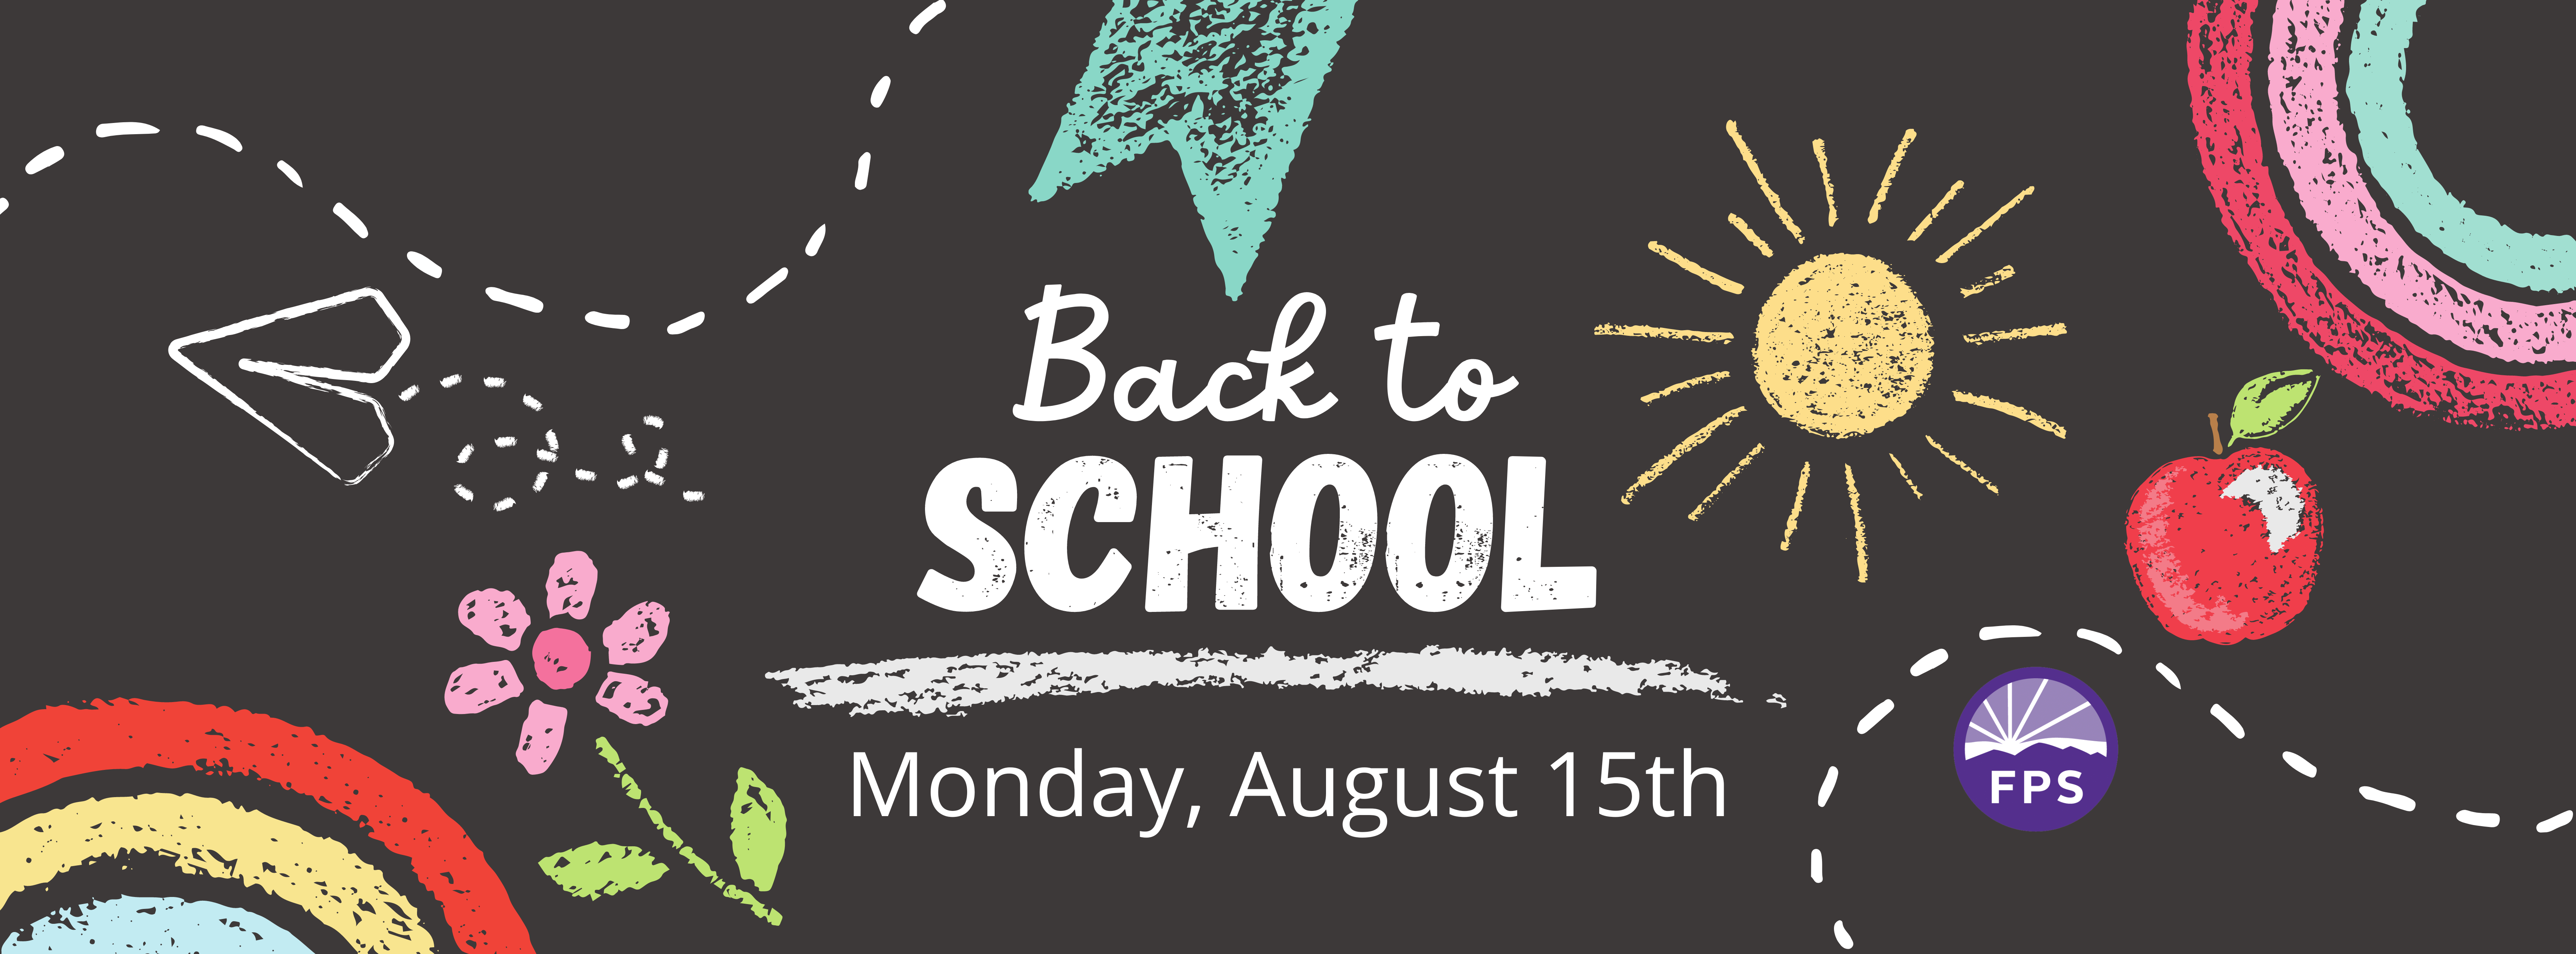 Back to School - Monday, August 15